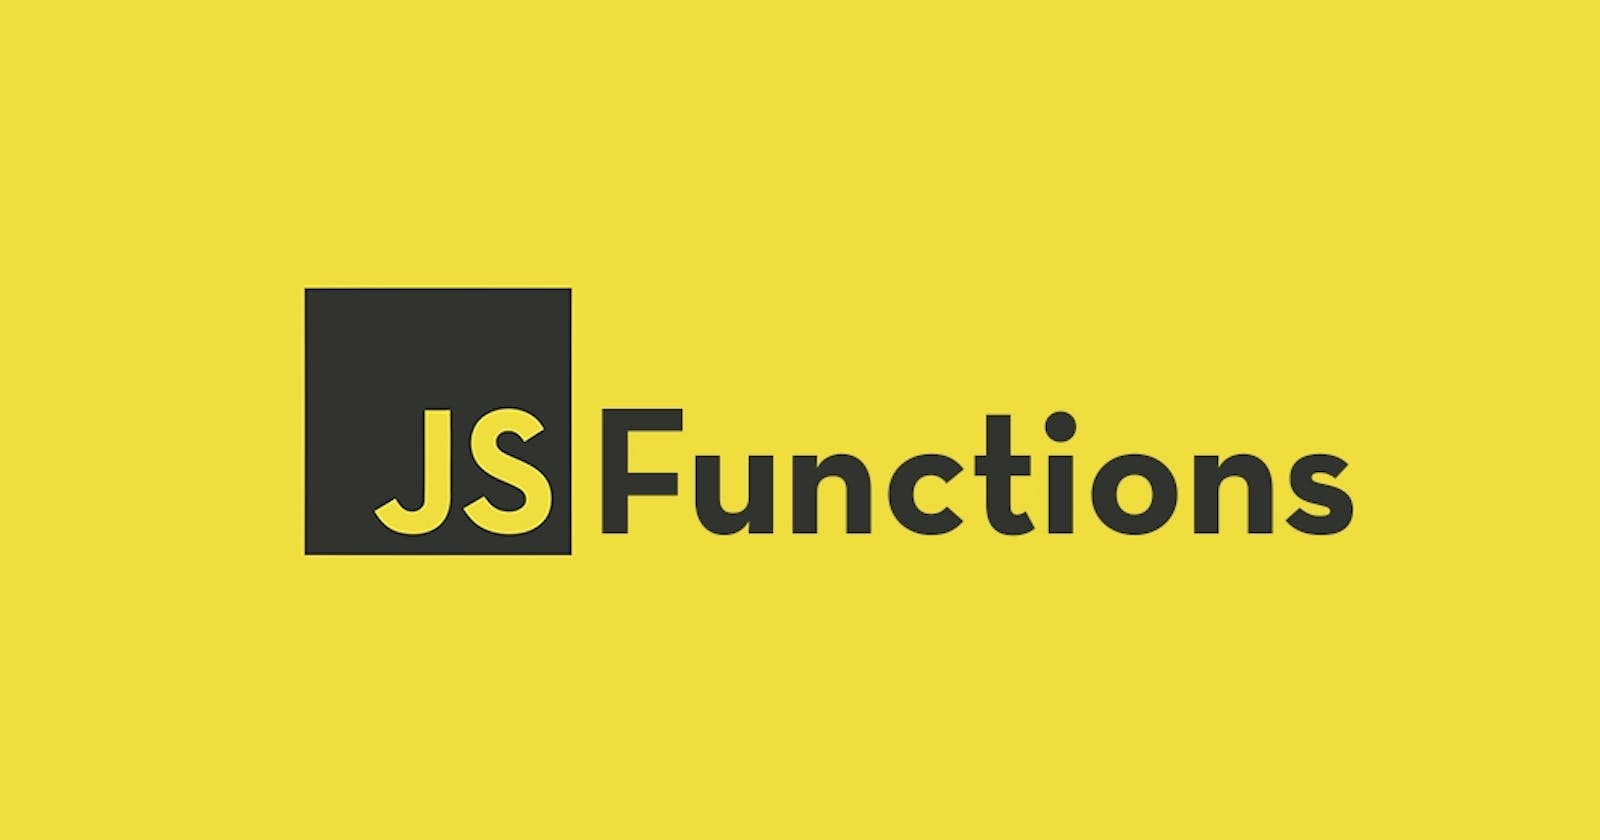 First-class Function in JavaScript